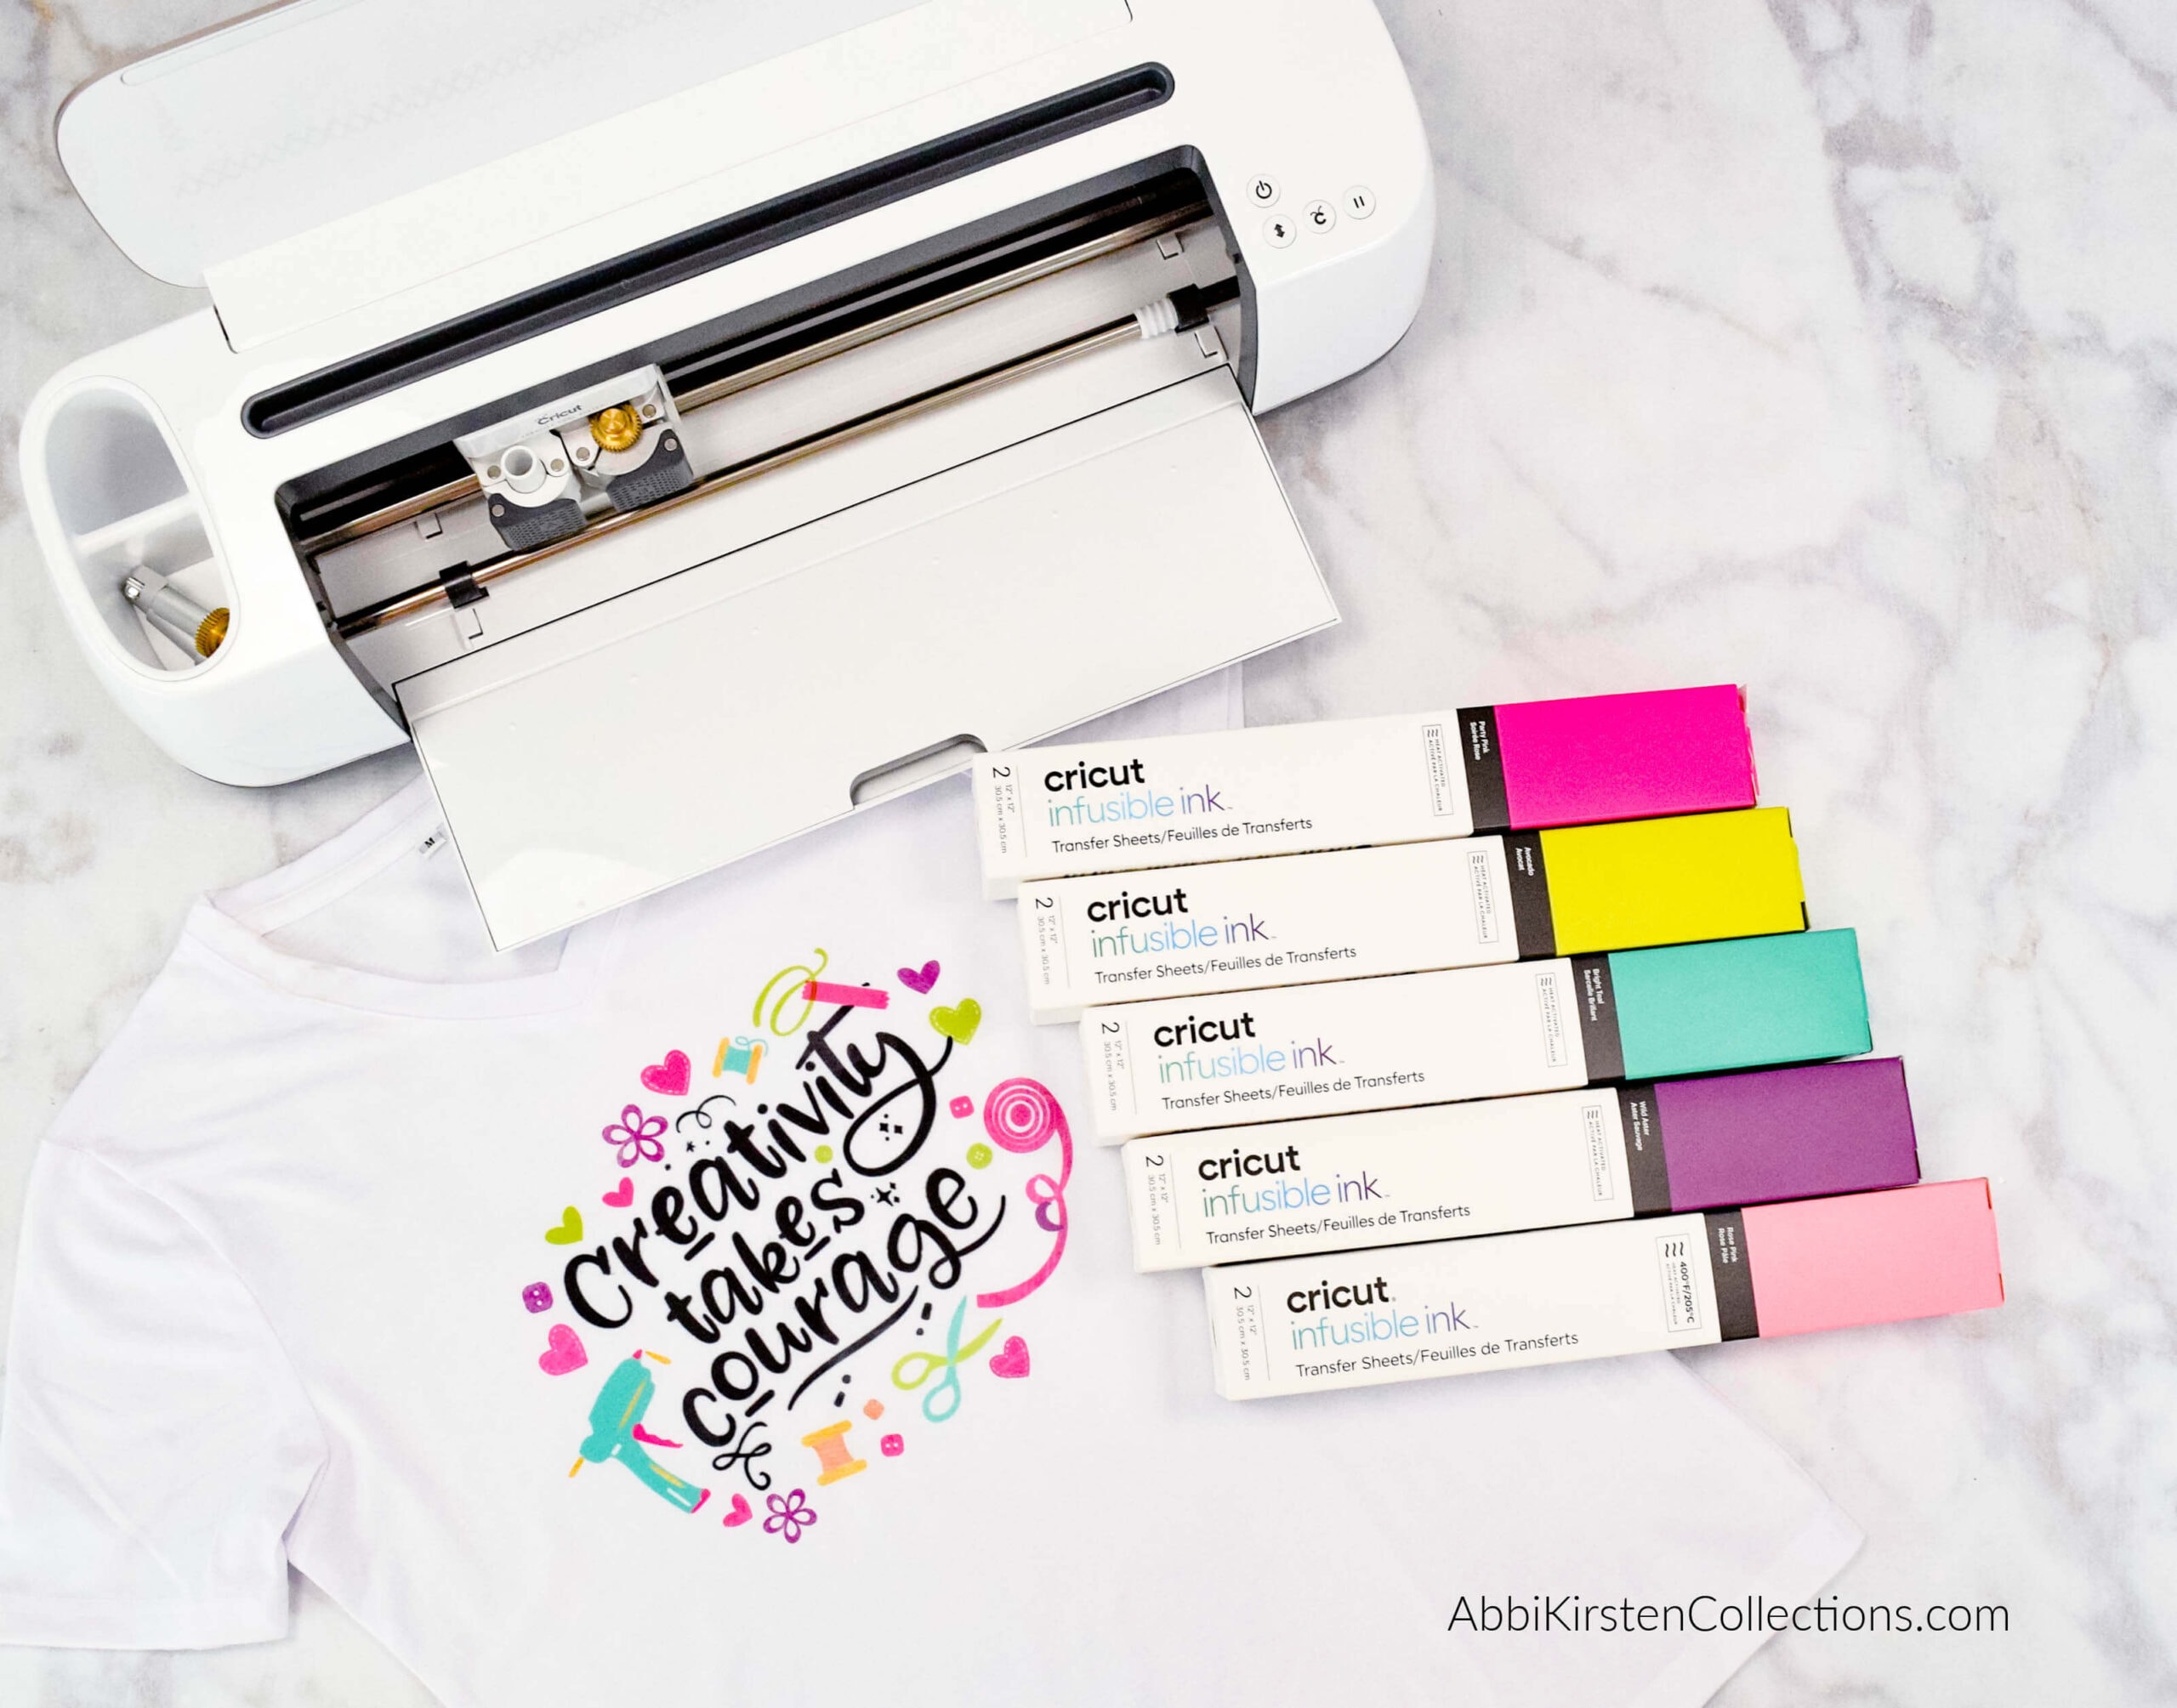 How to Use Cricut Infusible Ink: A Beginner's Guide - Sarah Maker